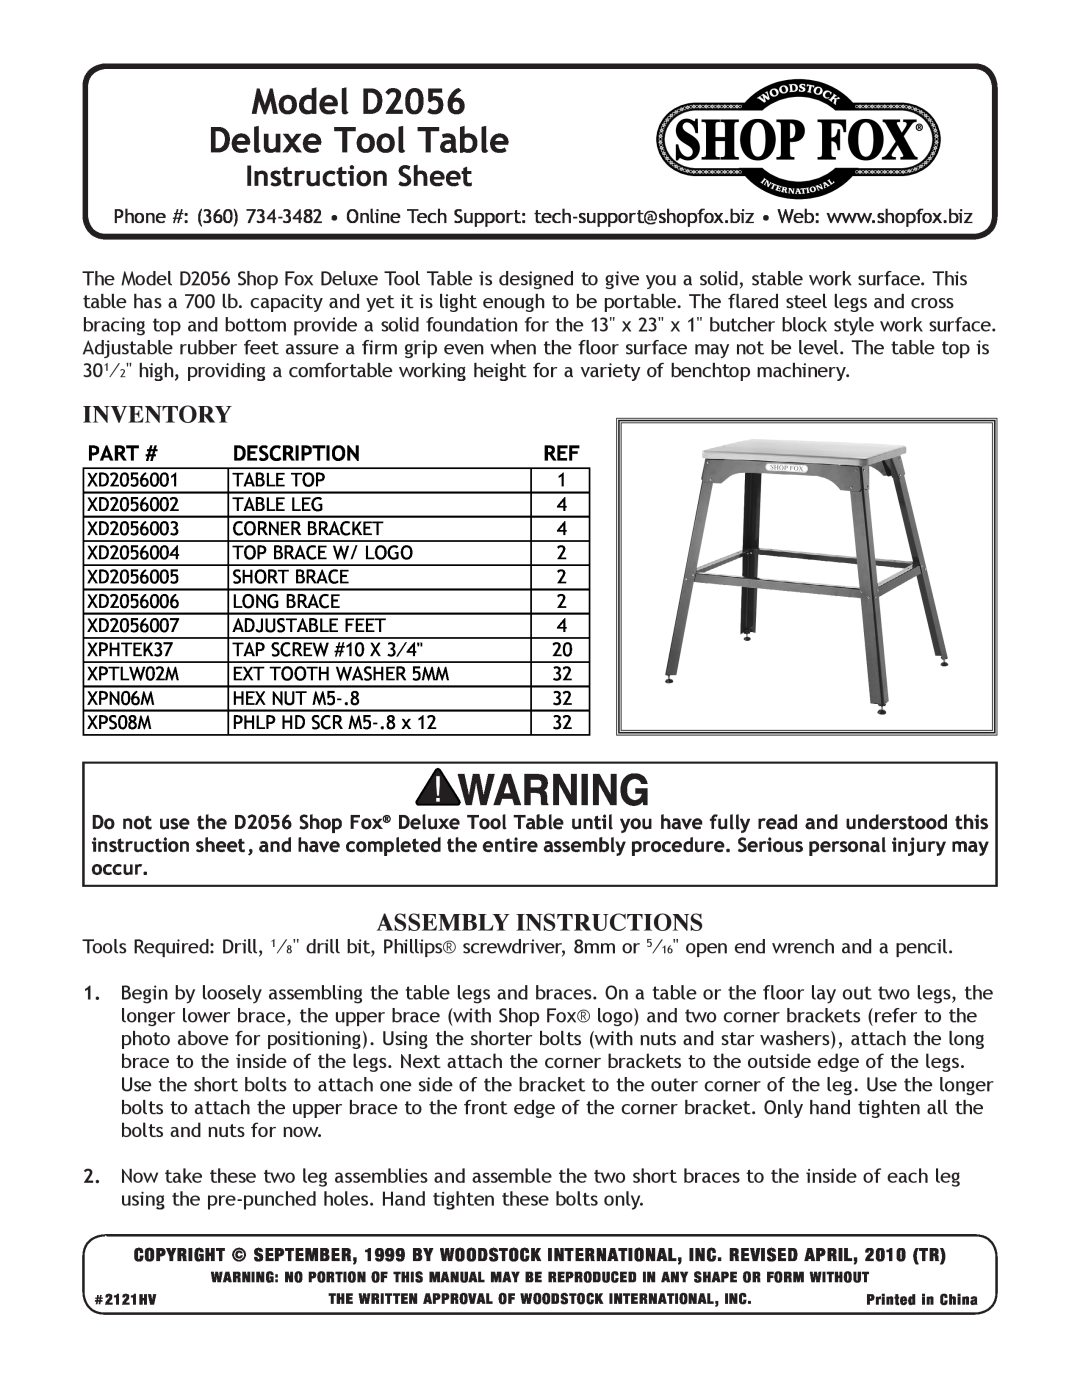 Woodstock instruction sheet Inventory, Assembly Instructions, Model D2056 Deluxe Tool Table, Instruction Sheet, Part # 